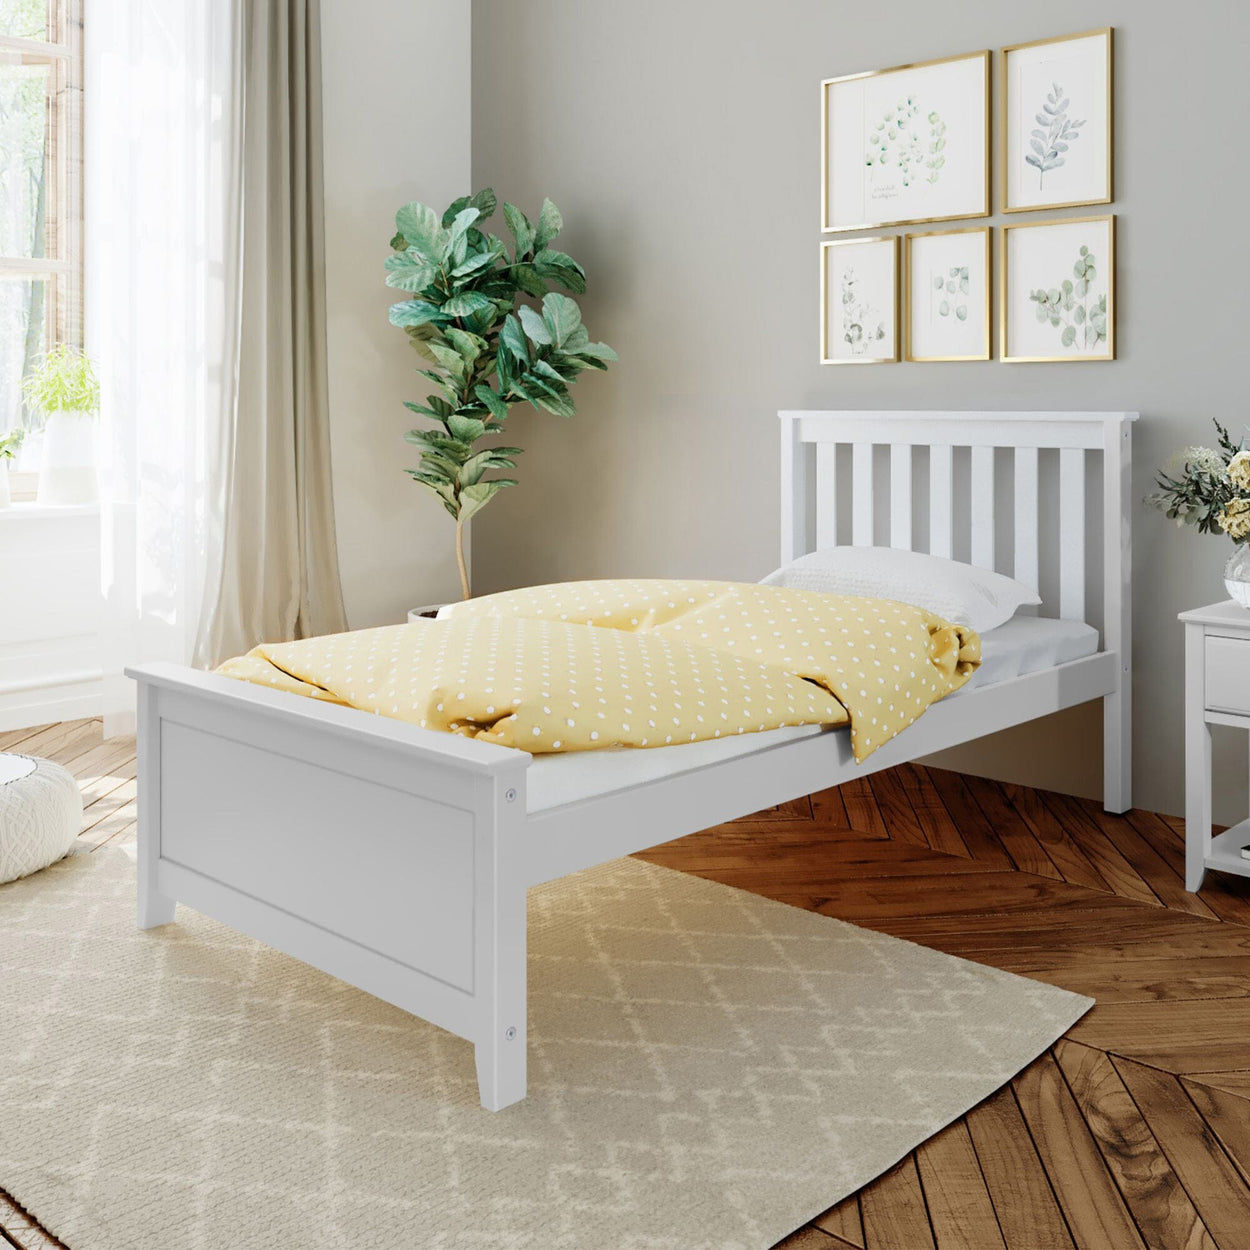 180210-002 : Kids Beds Classic Twin-Size Platform Bed, White